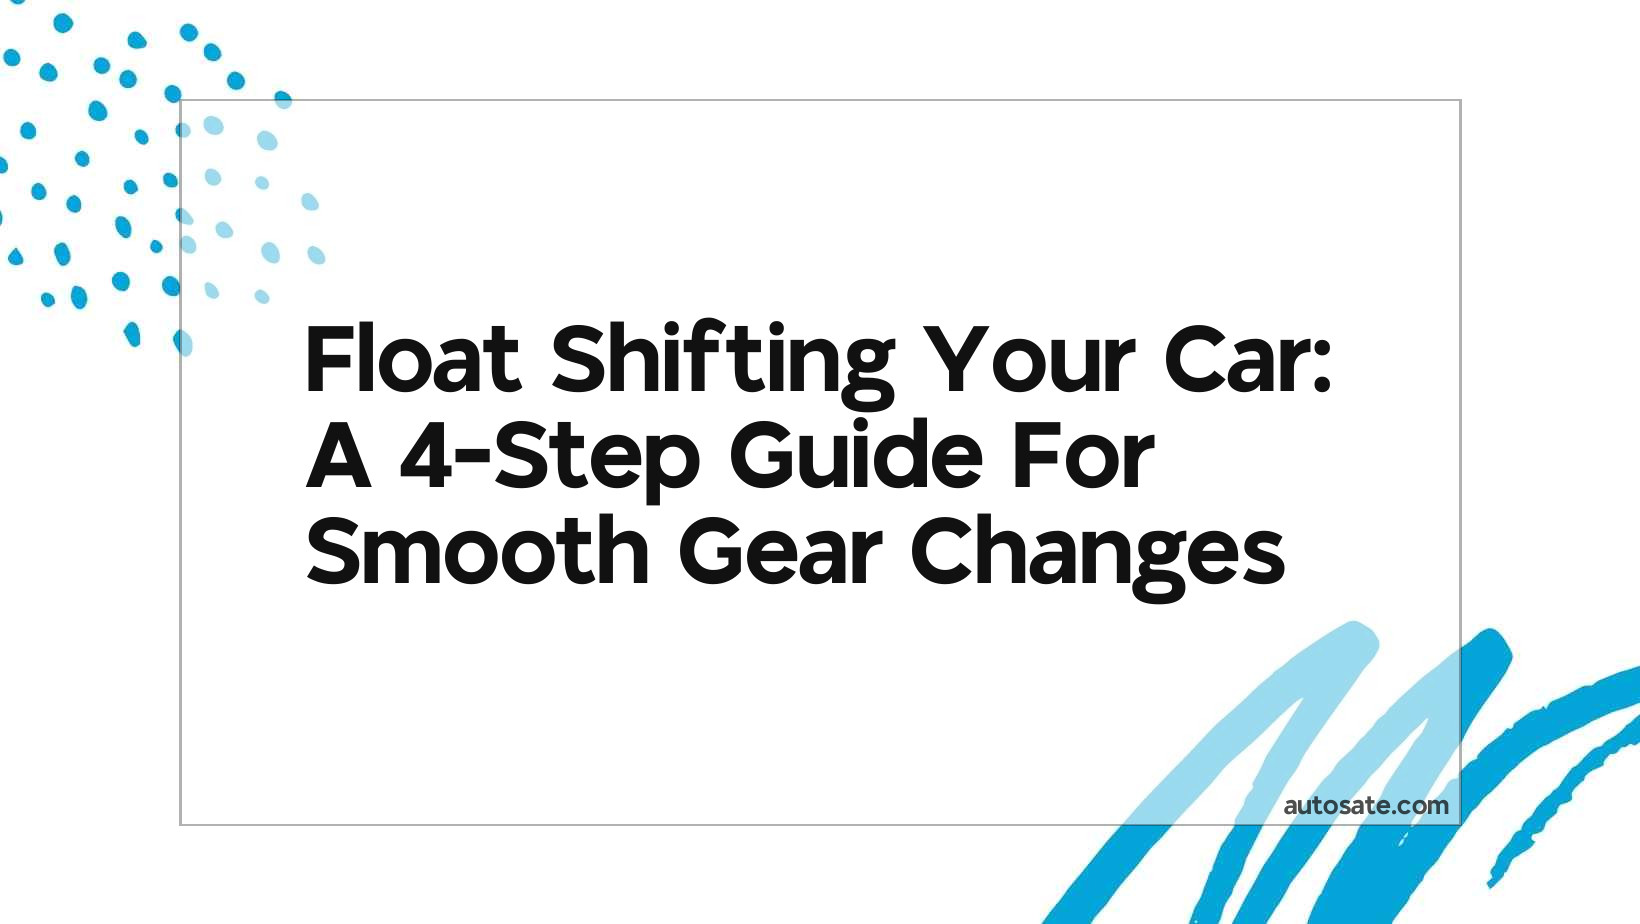 Float Shifting Your Car: A 4-Step Guide For Smooth Gear Changes